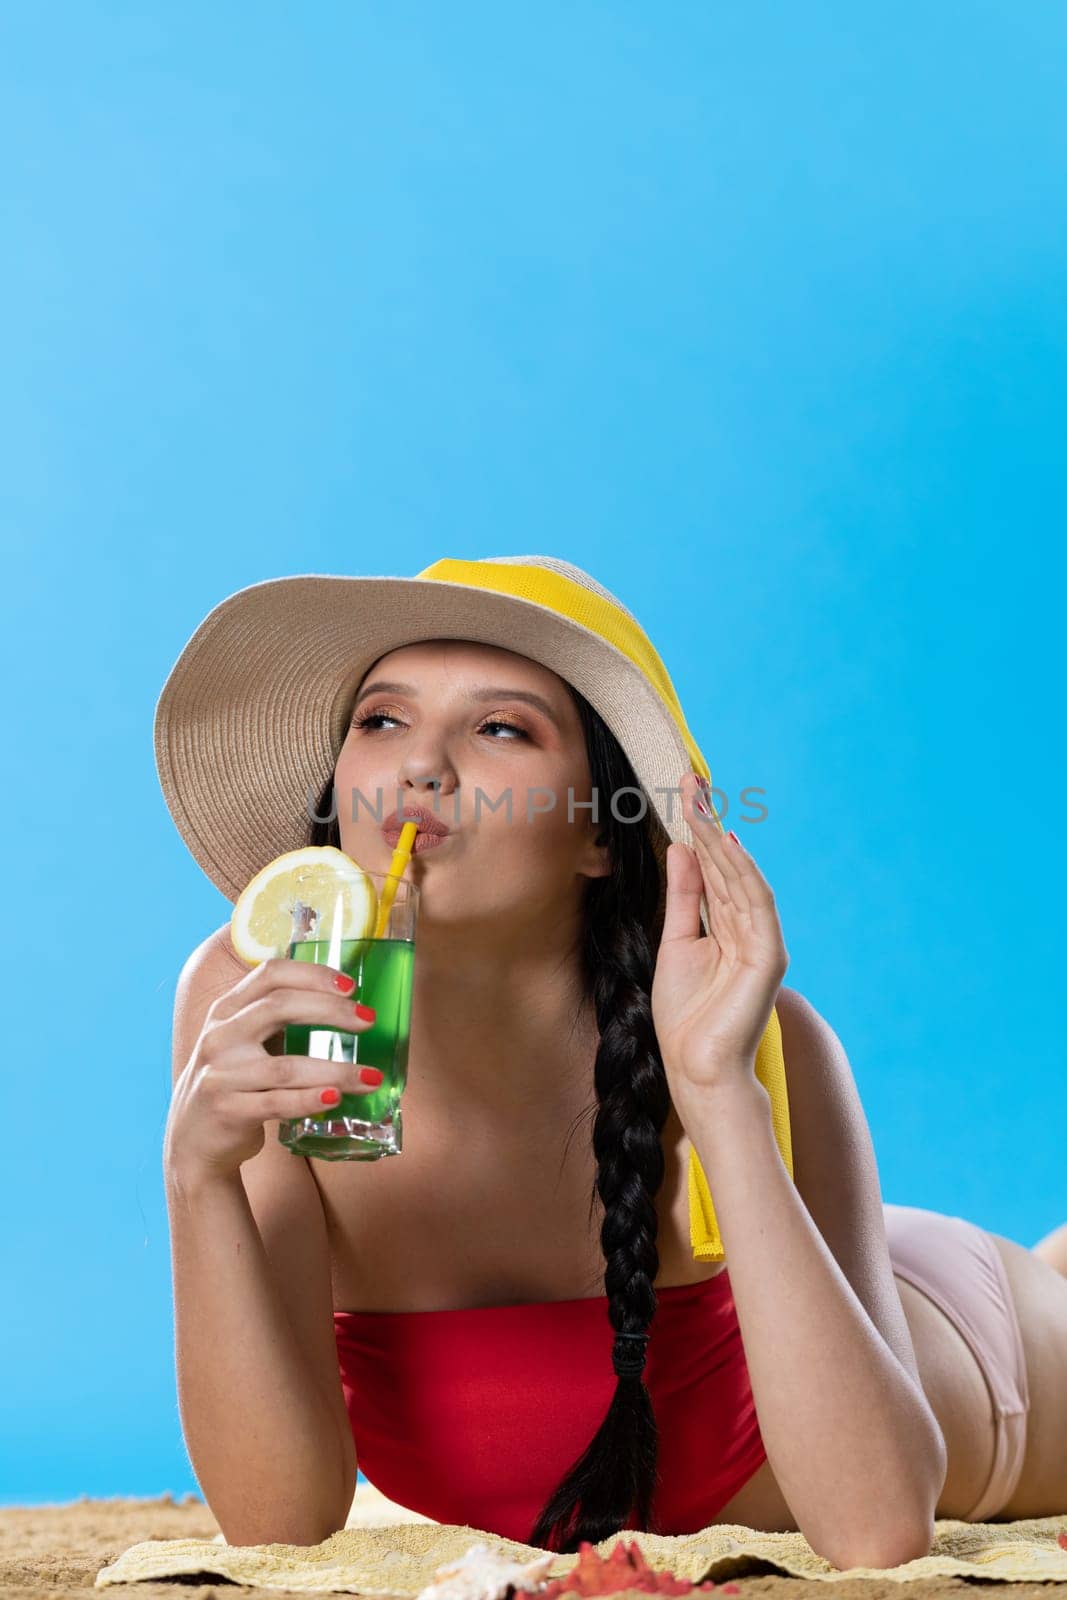 While sunbathing on the beach, a teenager drinks a cold alcoholic drink.